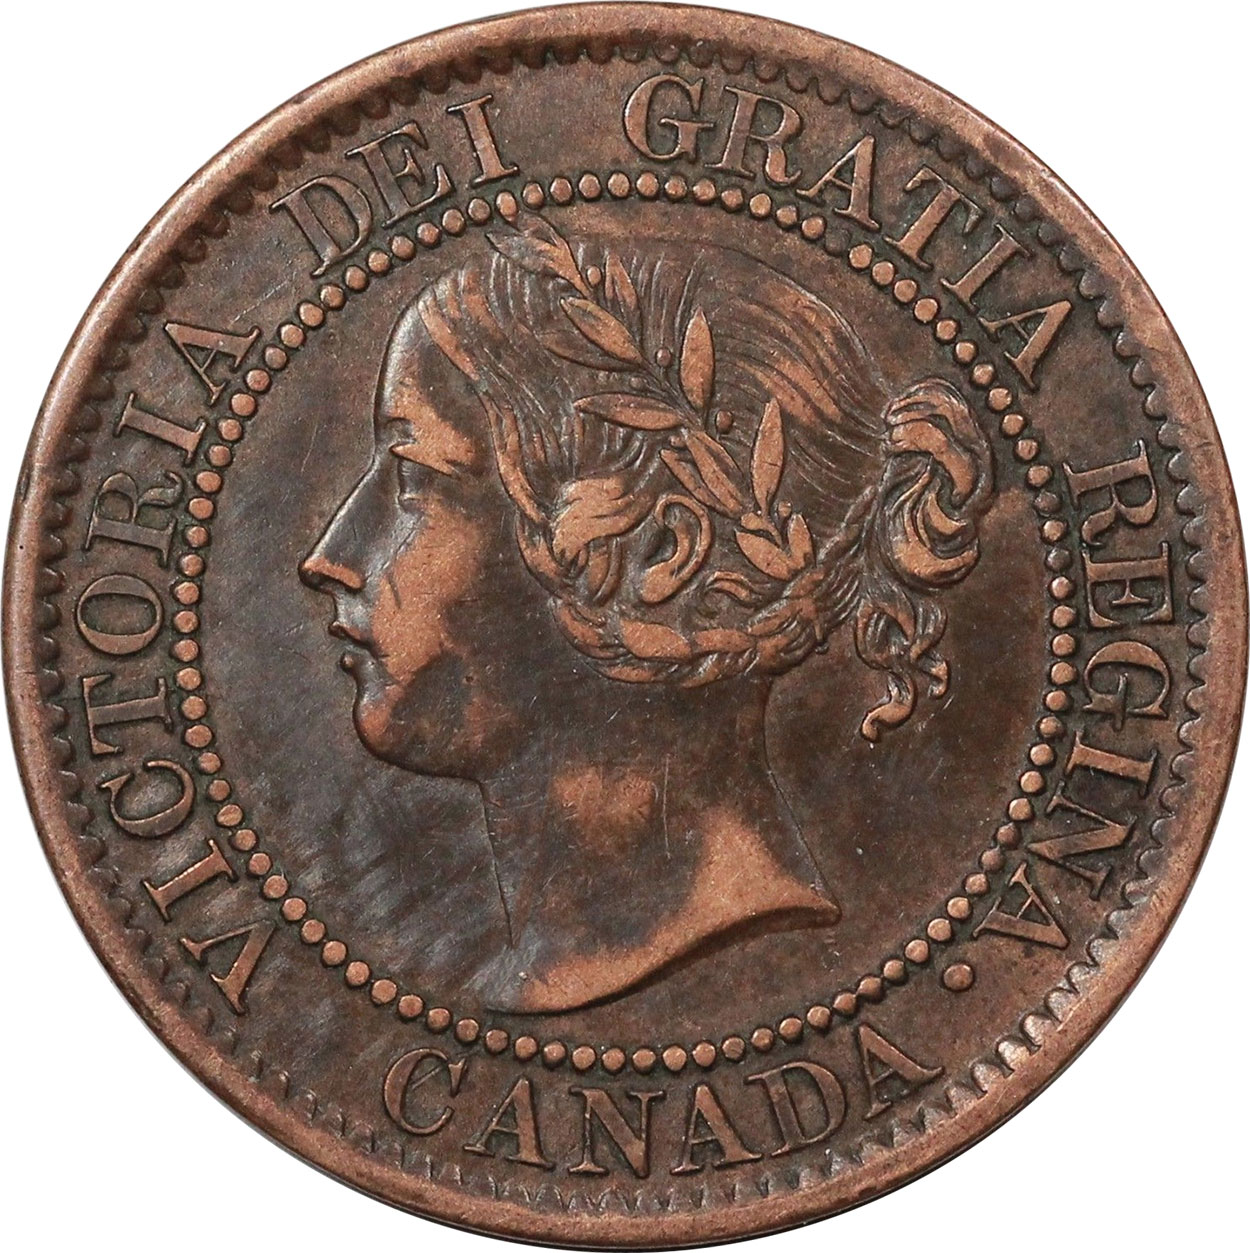 EF-40 - 1 cent 1858 and 1859 - Victoria